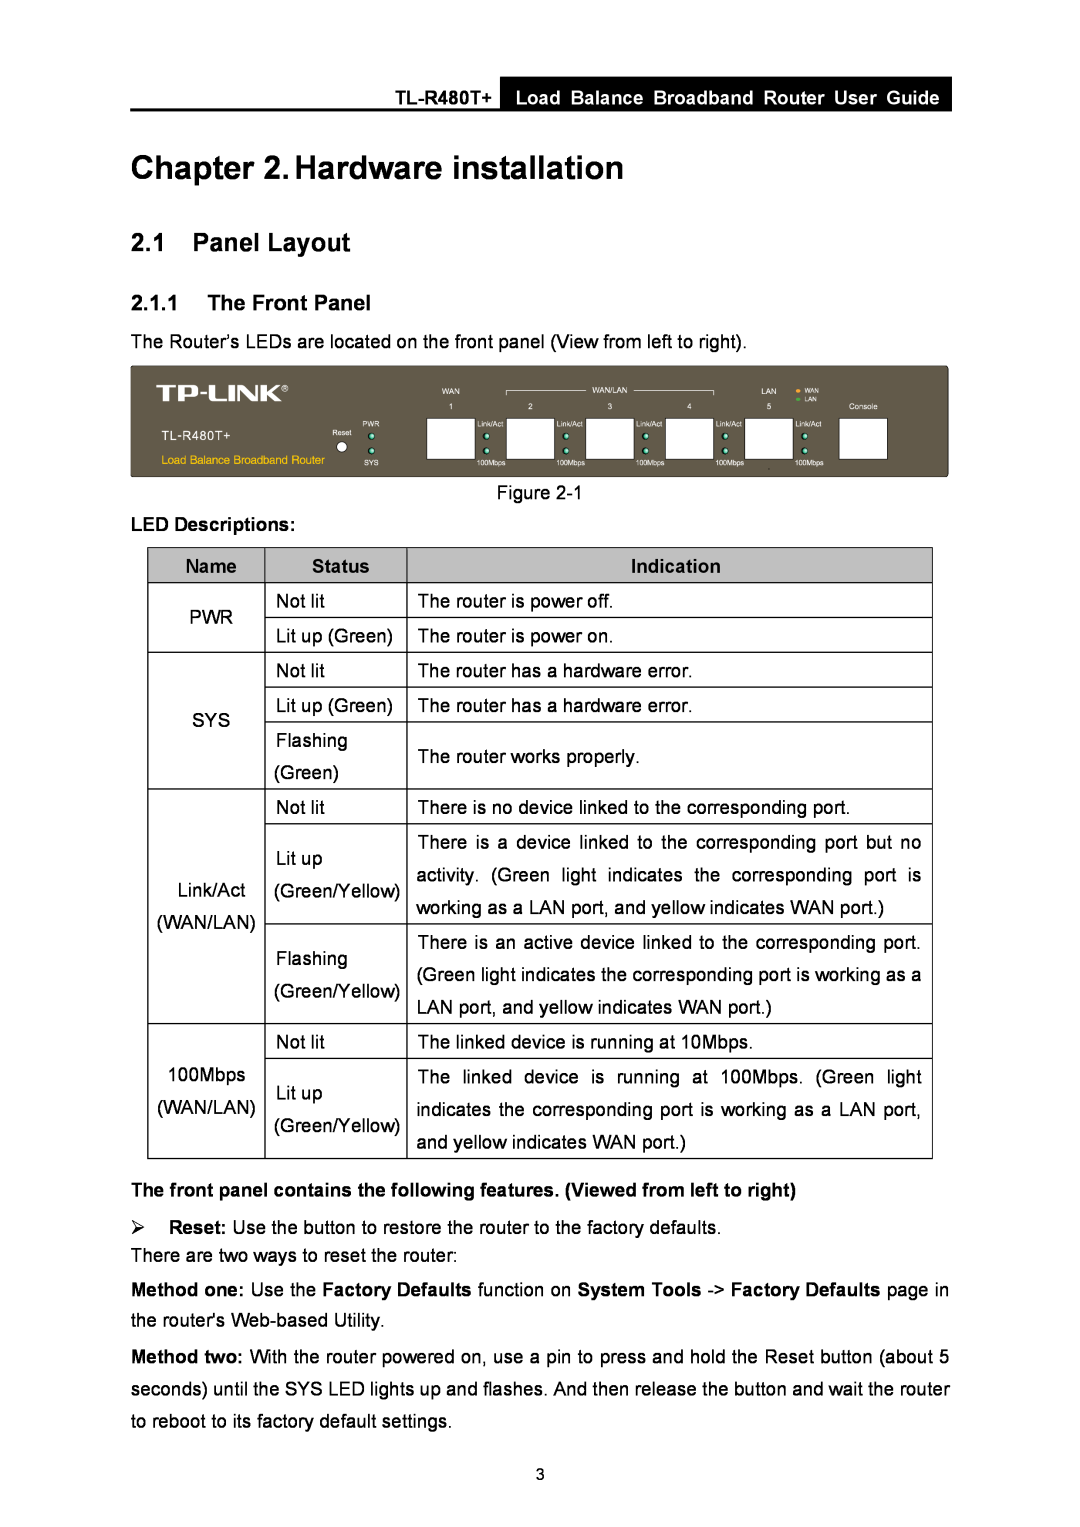 TP-Link TL-R480T+ Hardware installation, Panel Layout, The Front Panel, Load Balance Broadband Router User Guide, Status 